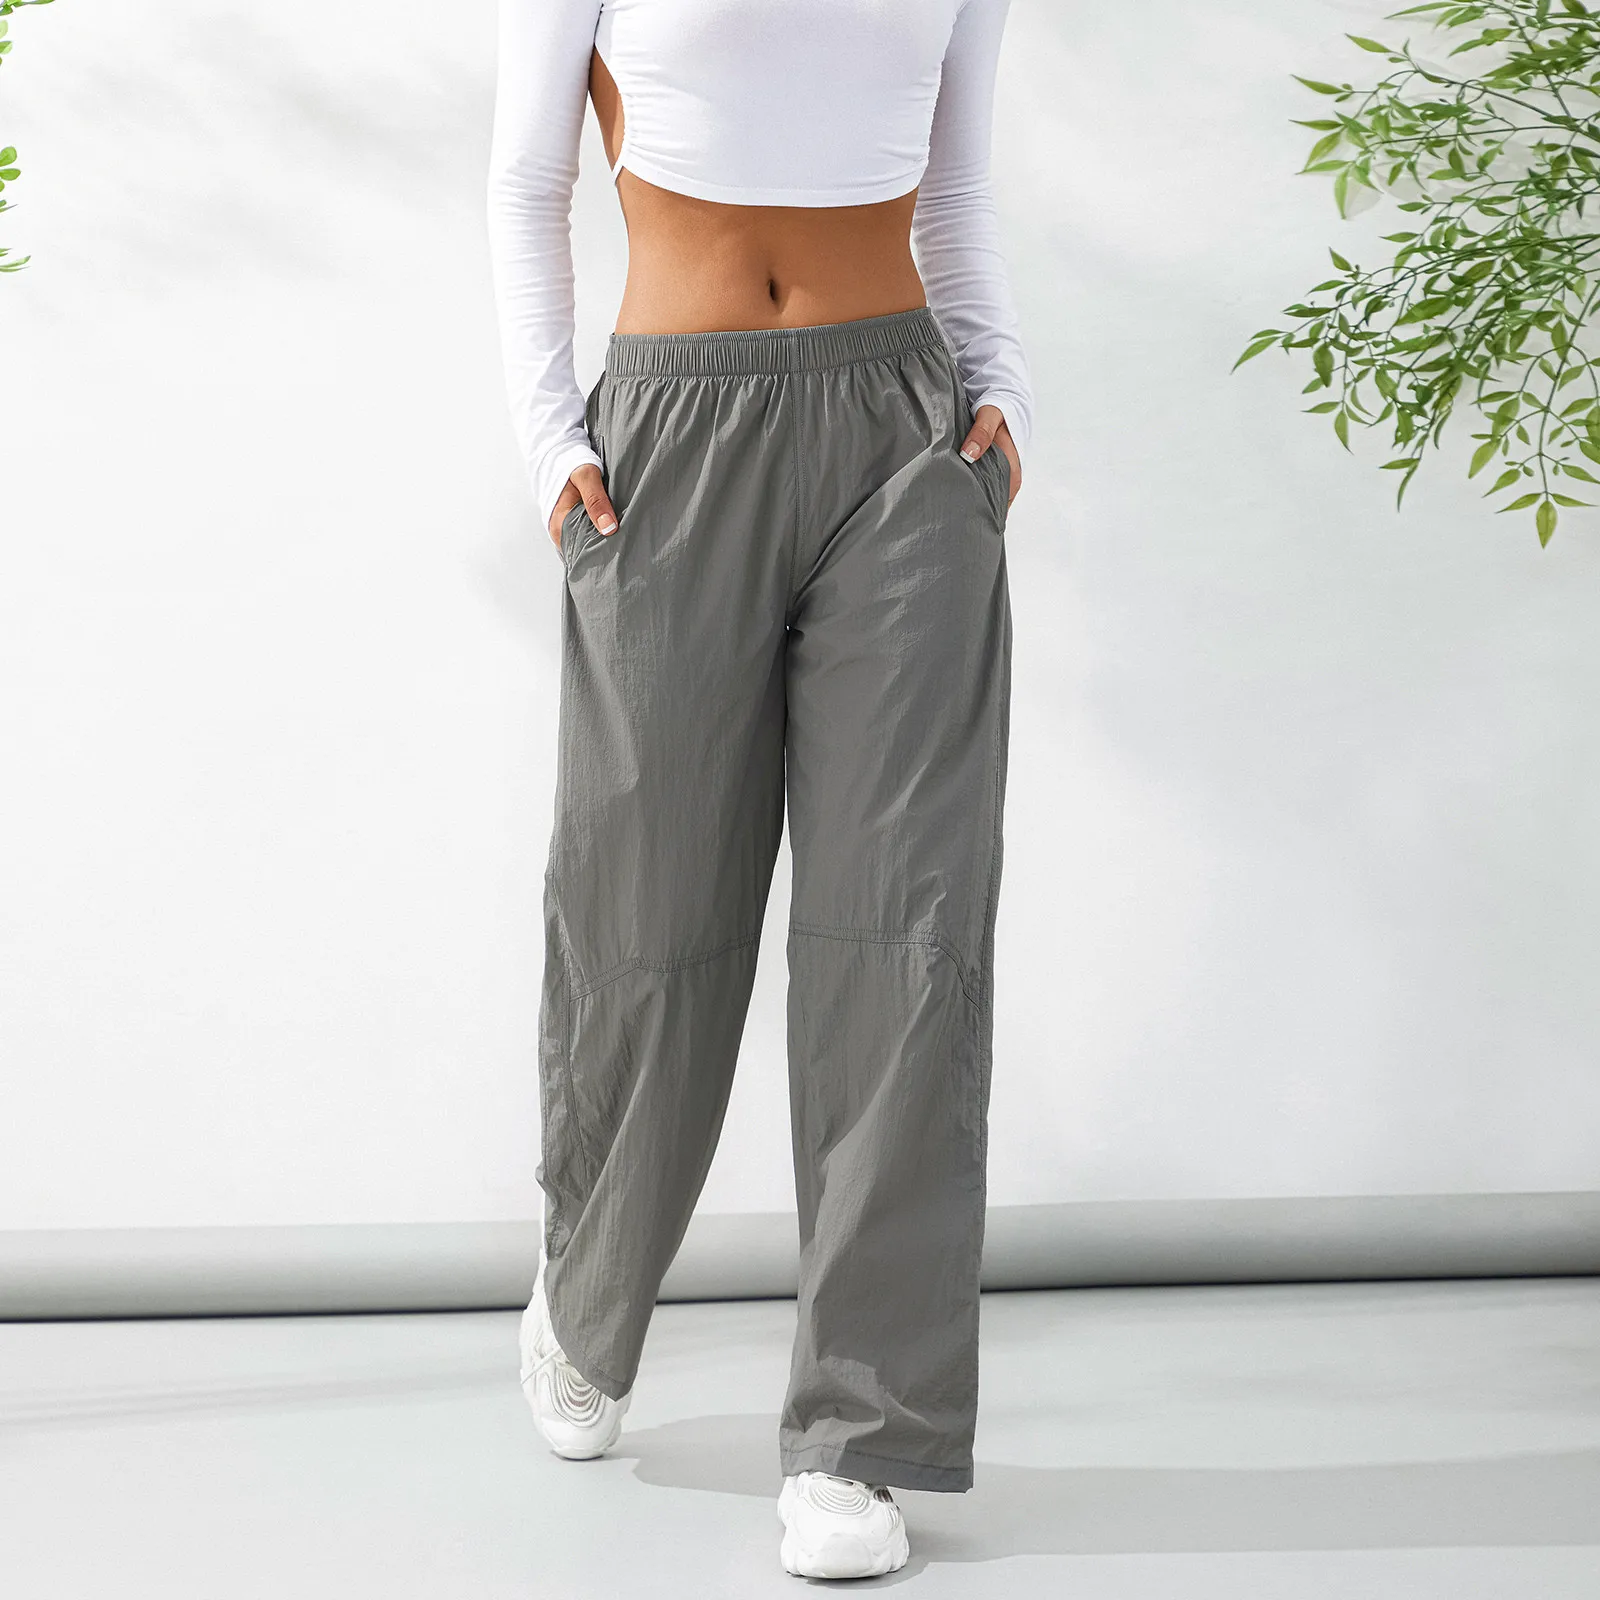 

Barggy Cargo Pants y2k Pockets Patched Low Waist Streetwear Sweatpants Women Vintage Harajuku Sporty Joggers for Autumn Spring